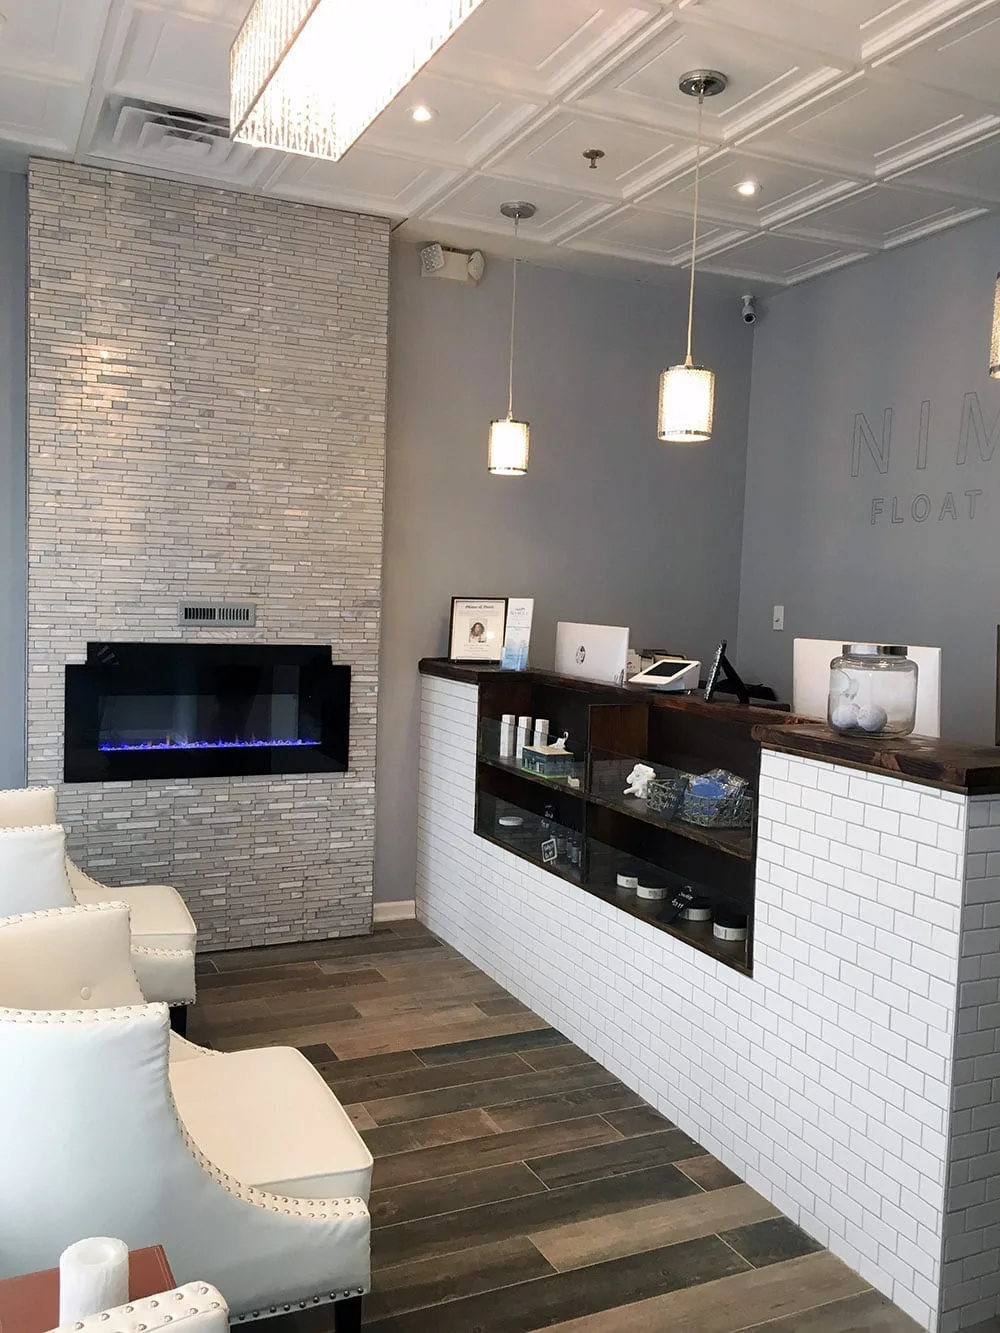 The front desk at Nimas Float and Spa.